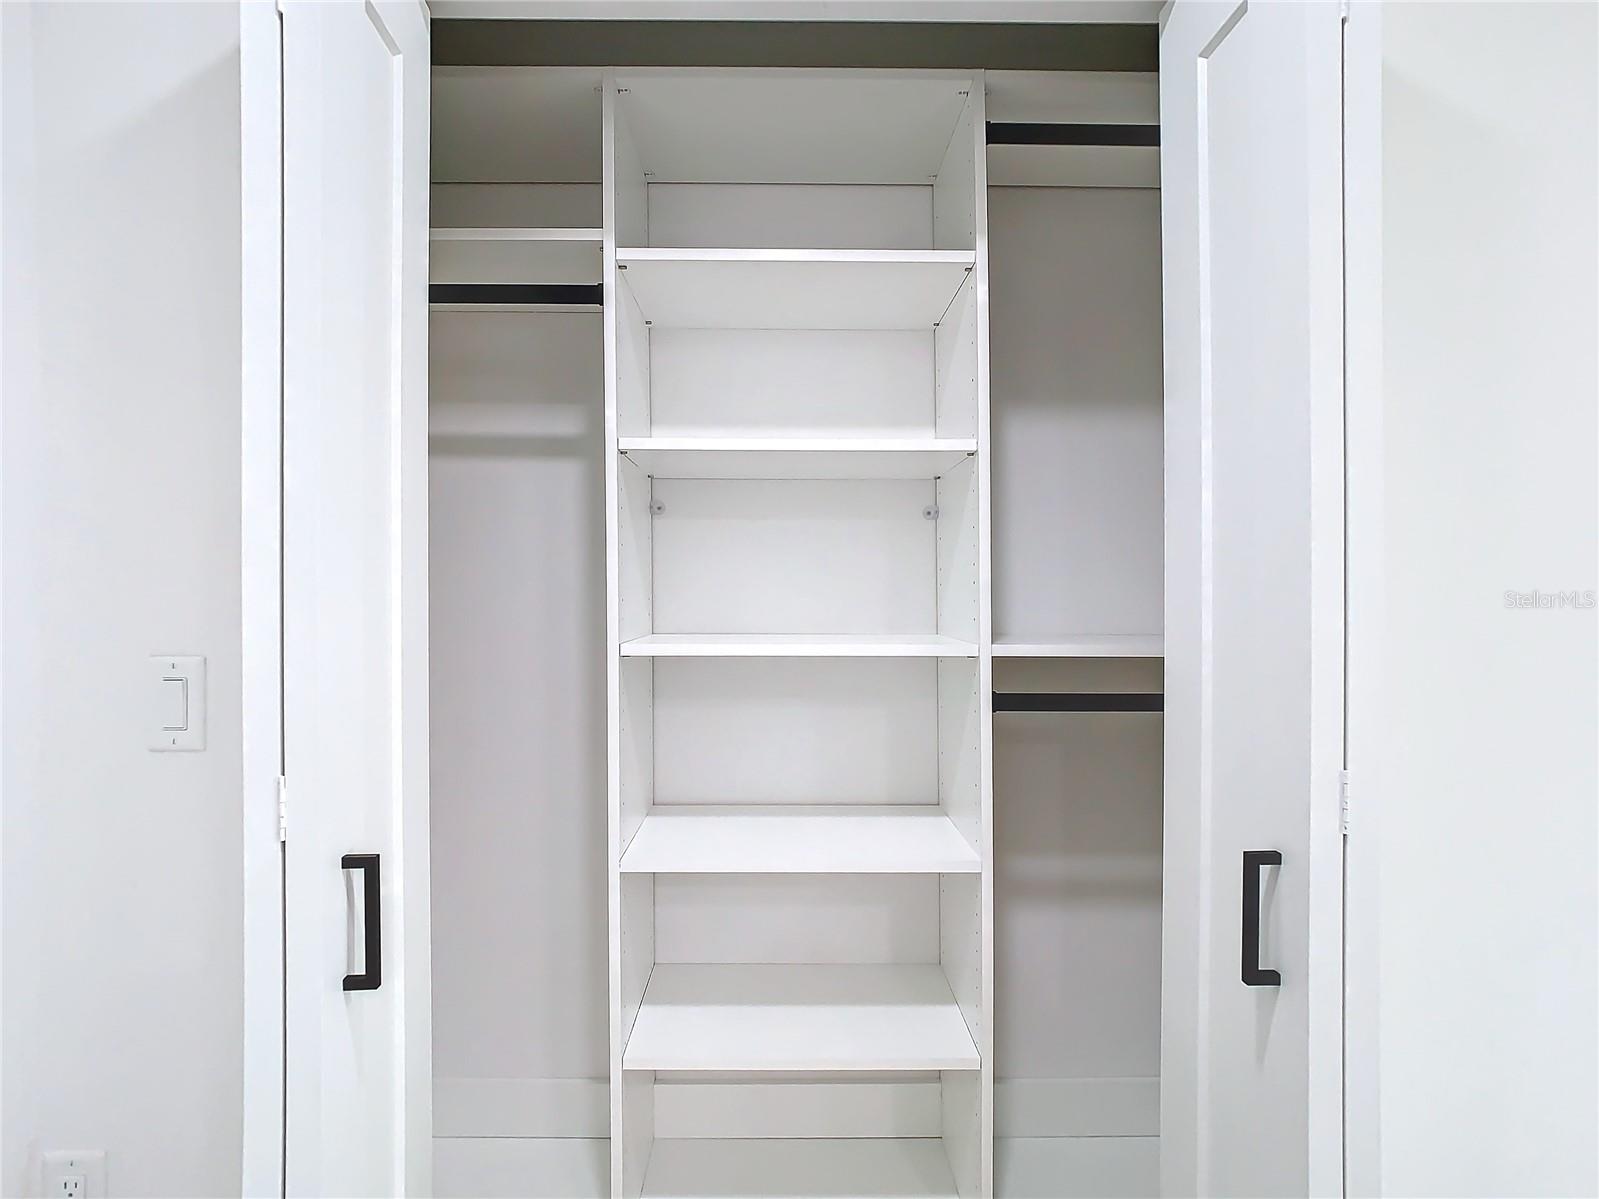 Built-in California Cabinetry in every closet